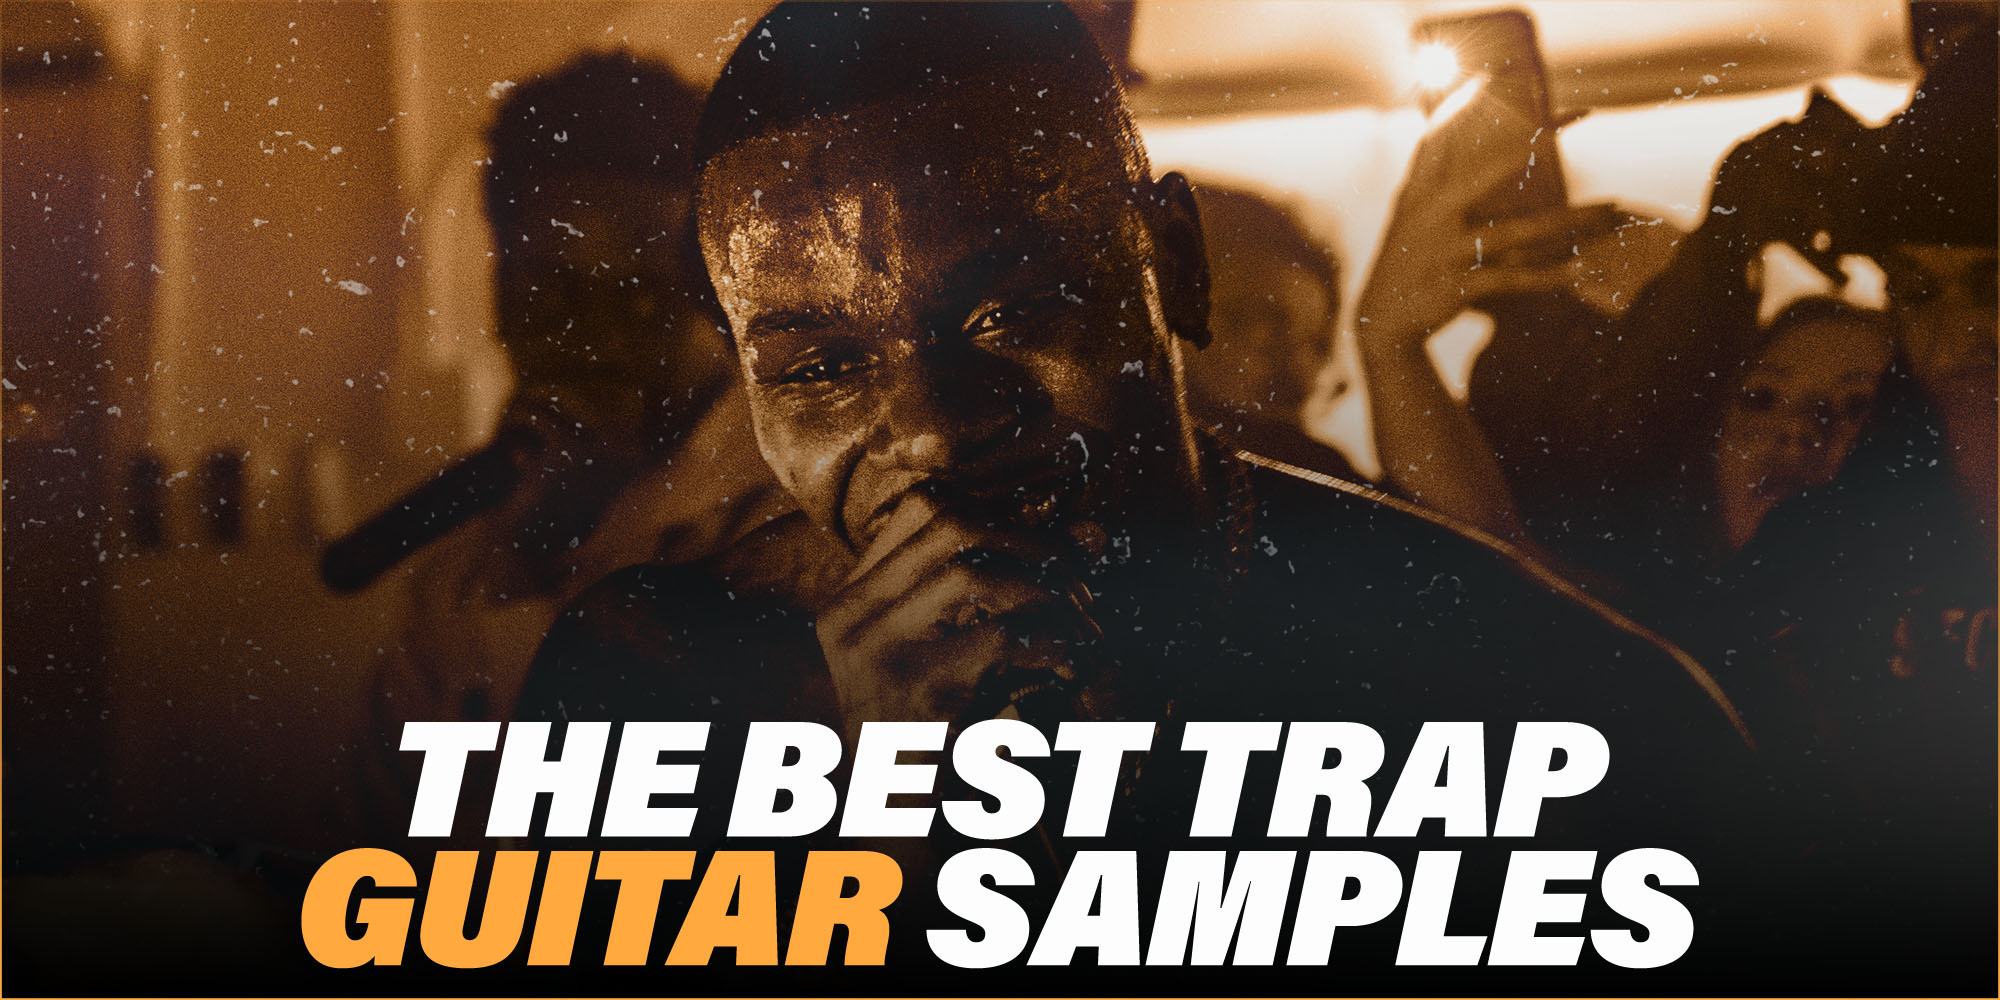 The Best Trap Guitar Samples